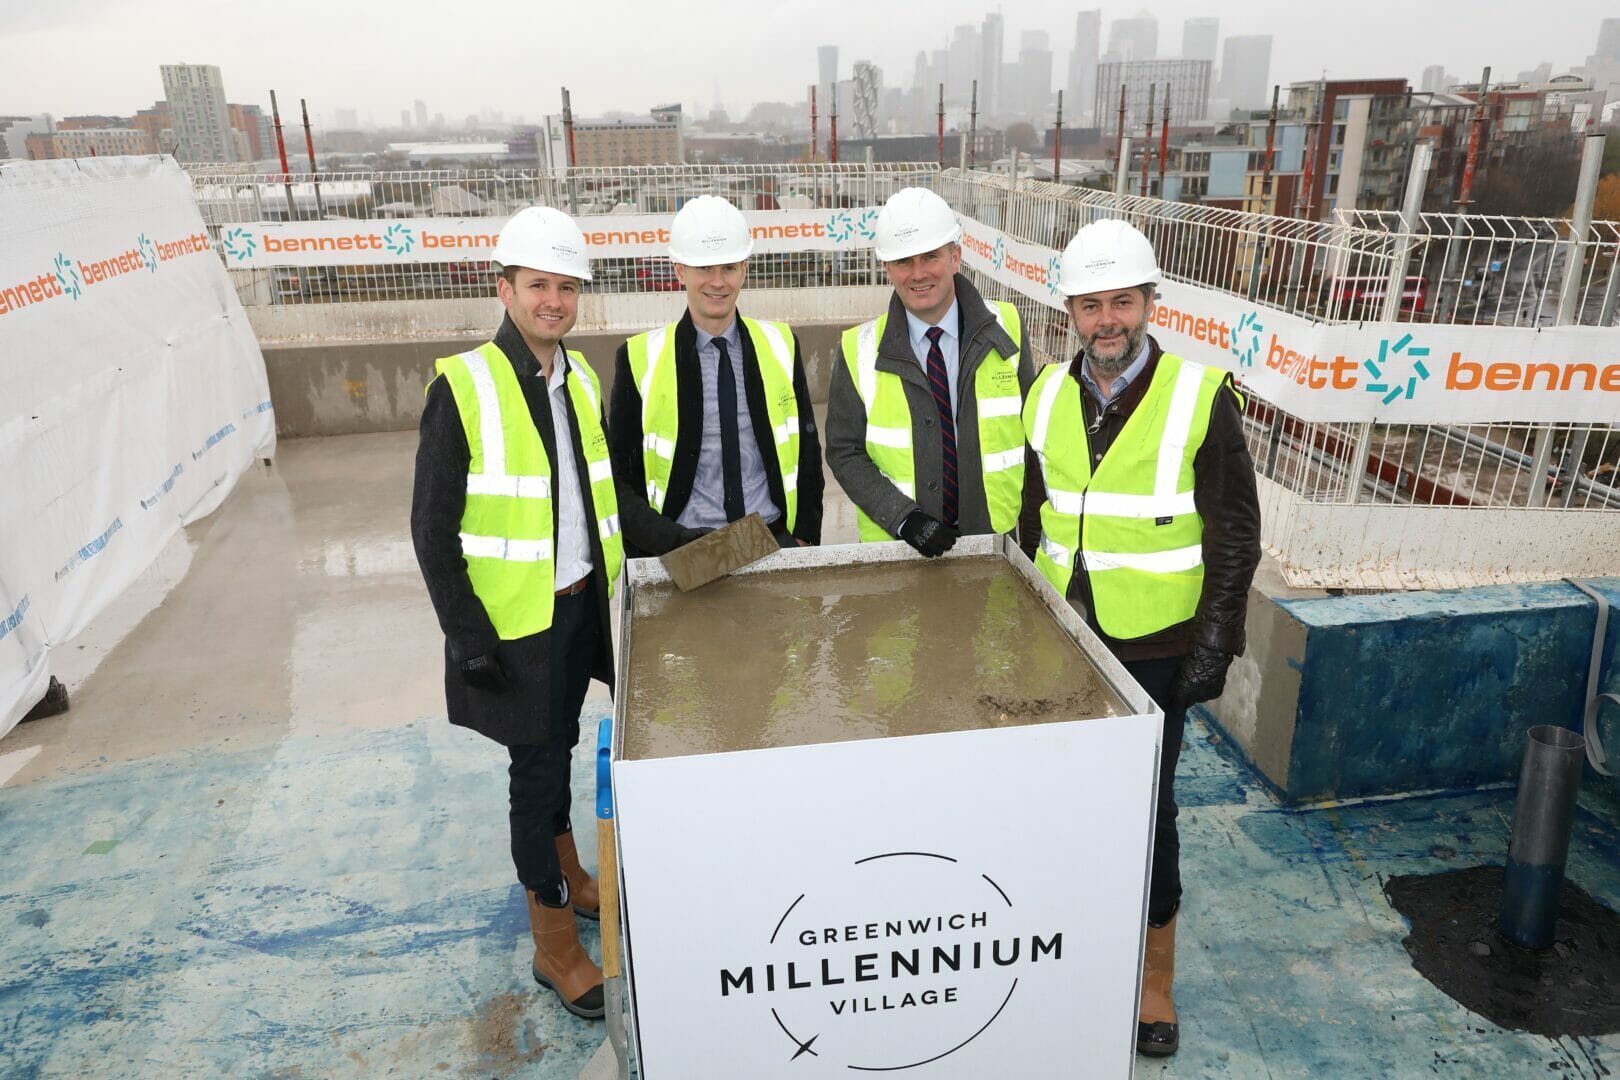 Greenwich Millennium Village celebrates “topping-out” of latest phase, Commodore’s Quarter   @GreenwichMV